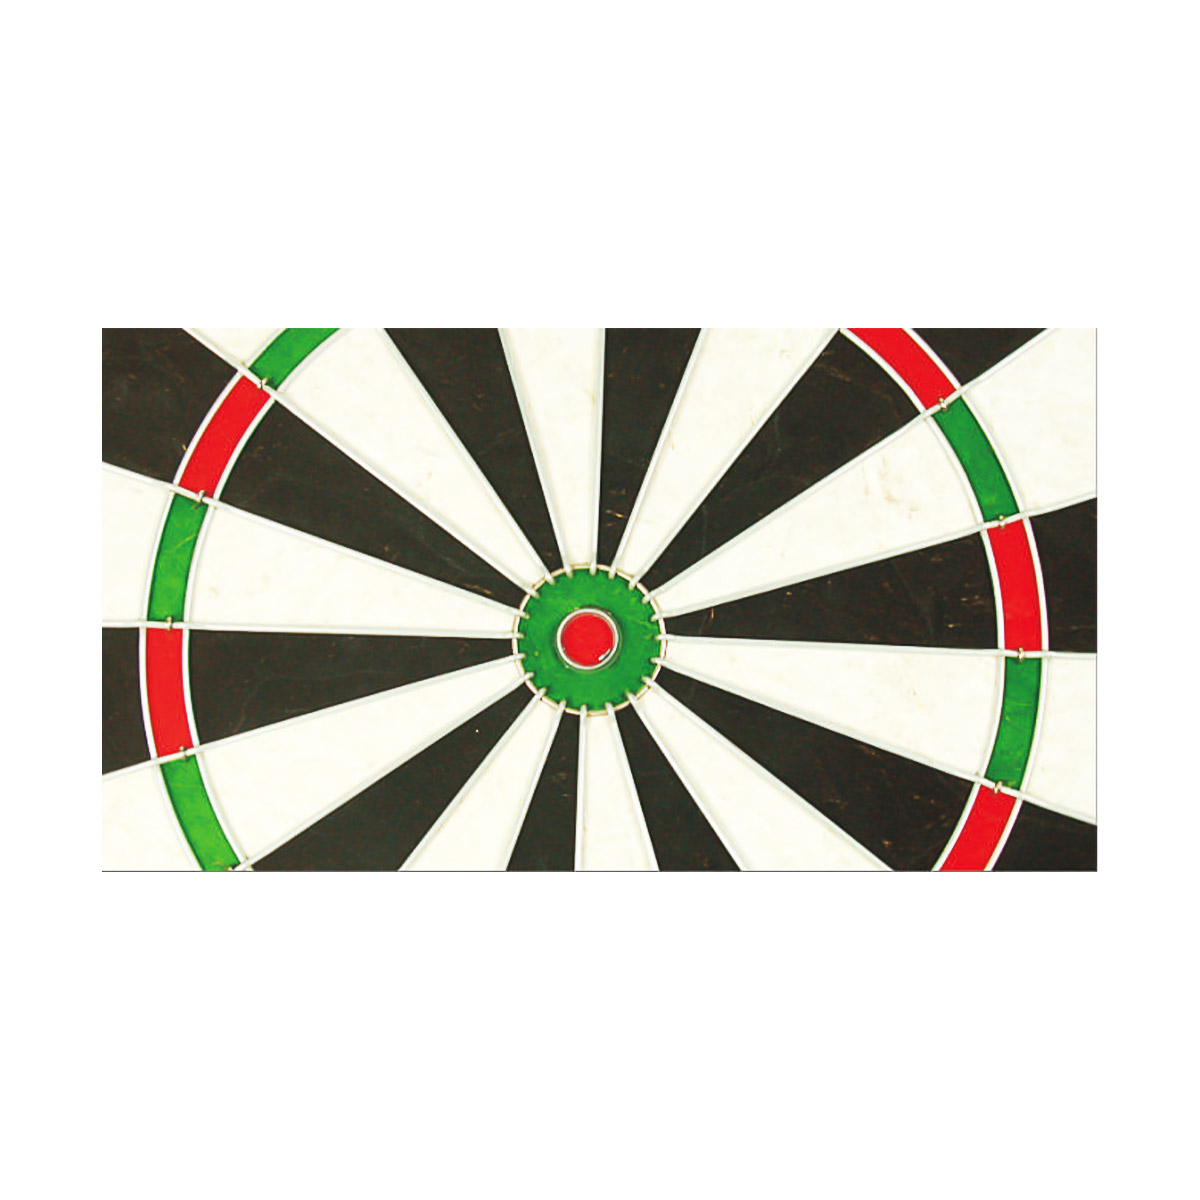 https://www.winmaxdartgame.com/high-definition-classical-bristle-dartboard-with-6-pcs-iron-darts-win-max-product/